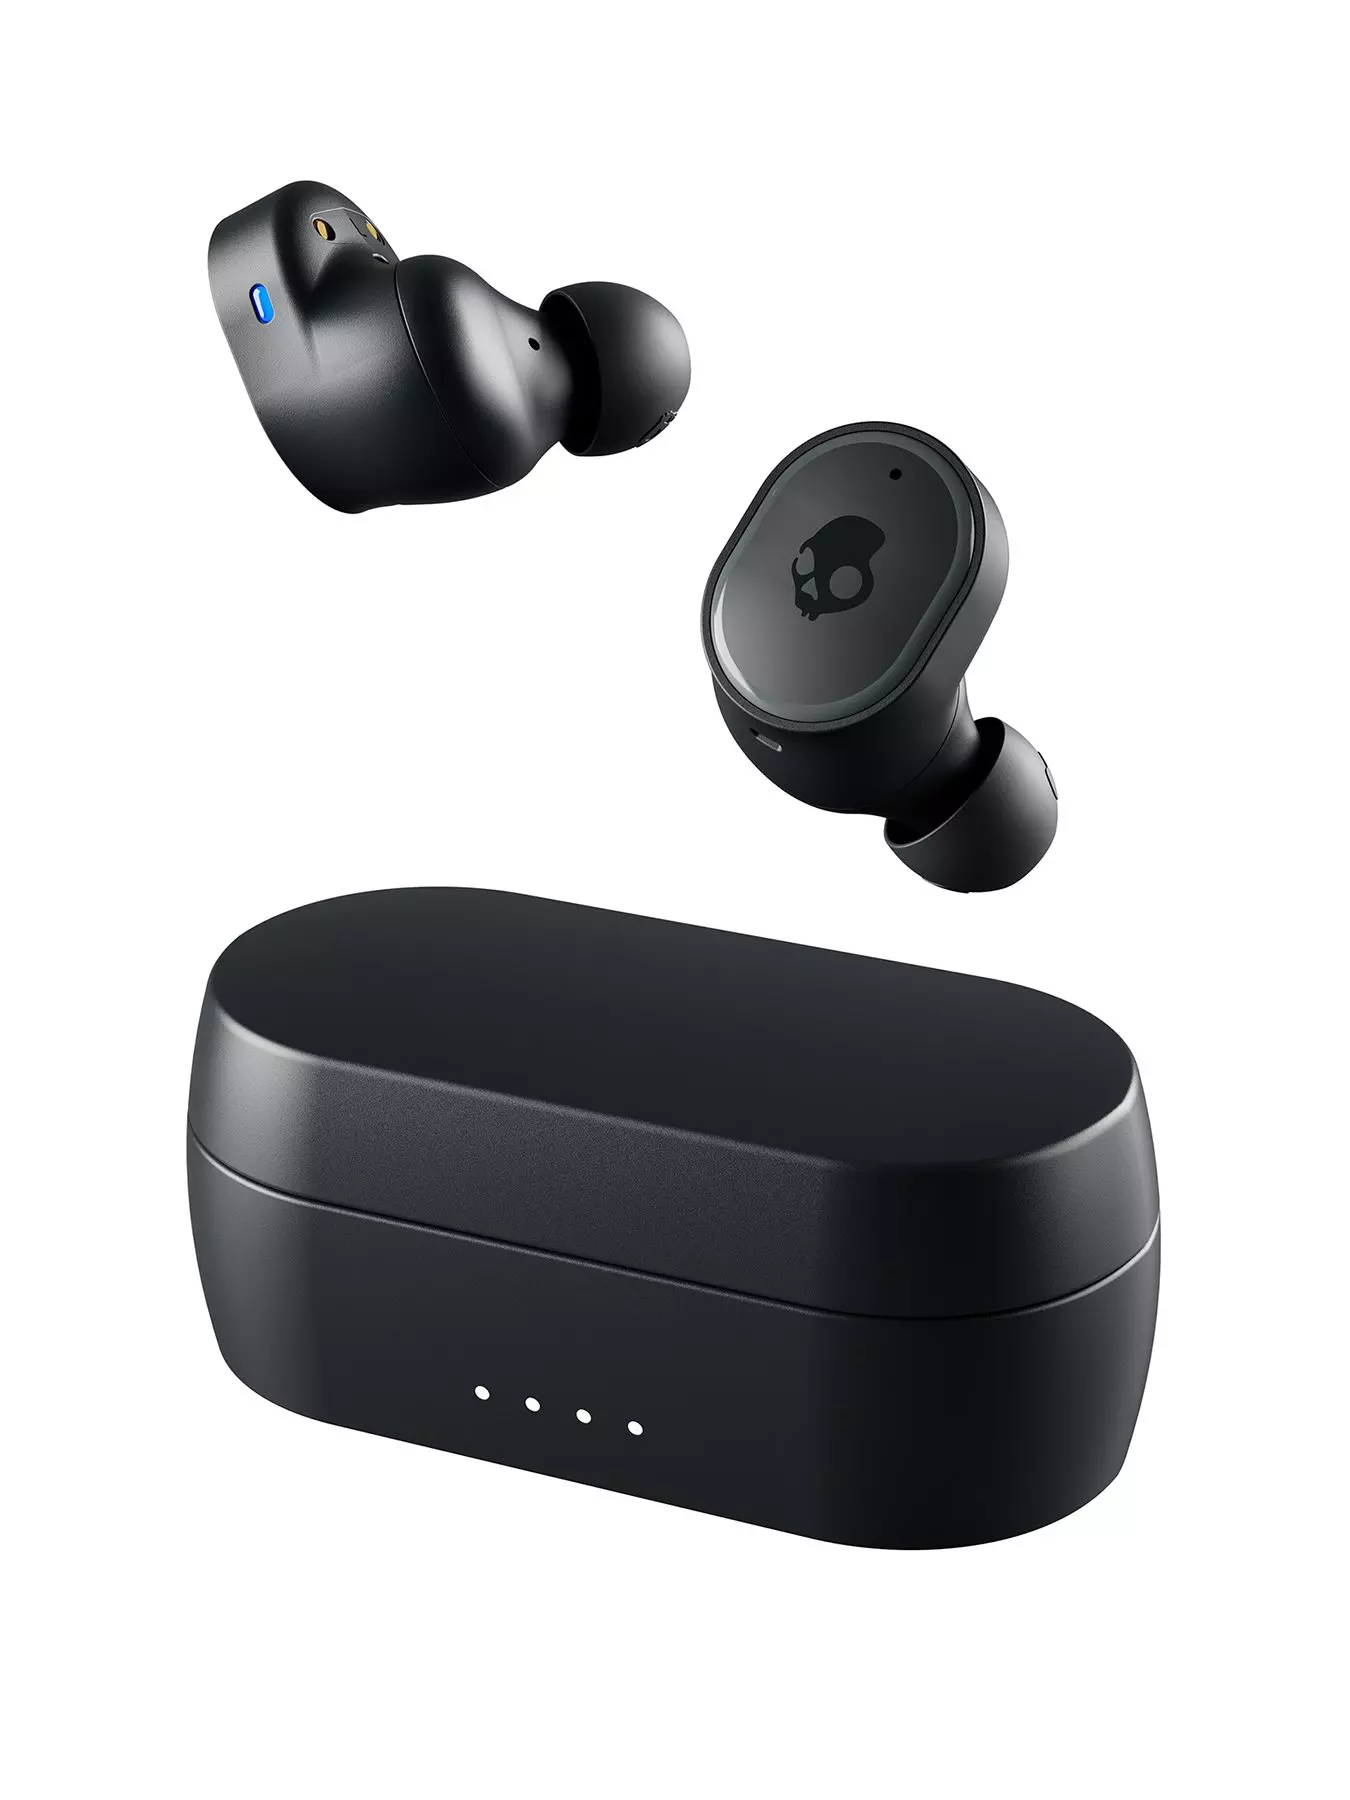 Nothing Ear 2 Hi-Res Wireless Earbuds, 2023 New Noise Cancelling Headphones  with Dual Chamber Design, Bluetooth Earbuds for iPhone, Android, 4.5g Ultra  Light, 36Hrs Playtime, Black